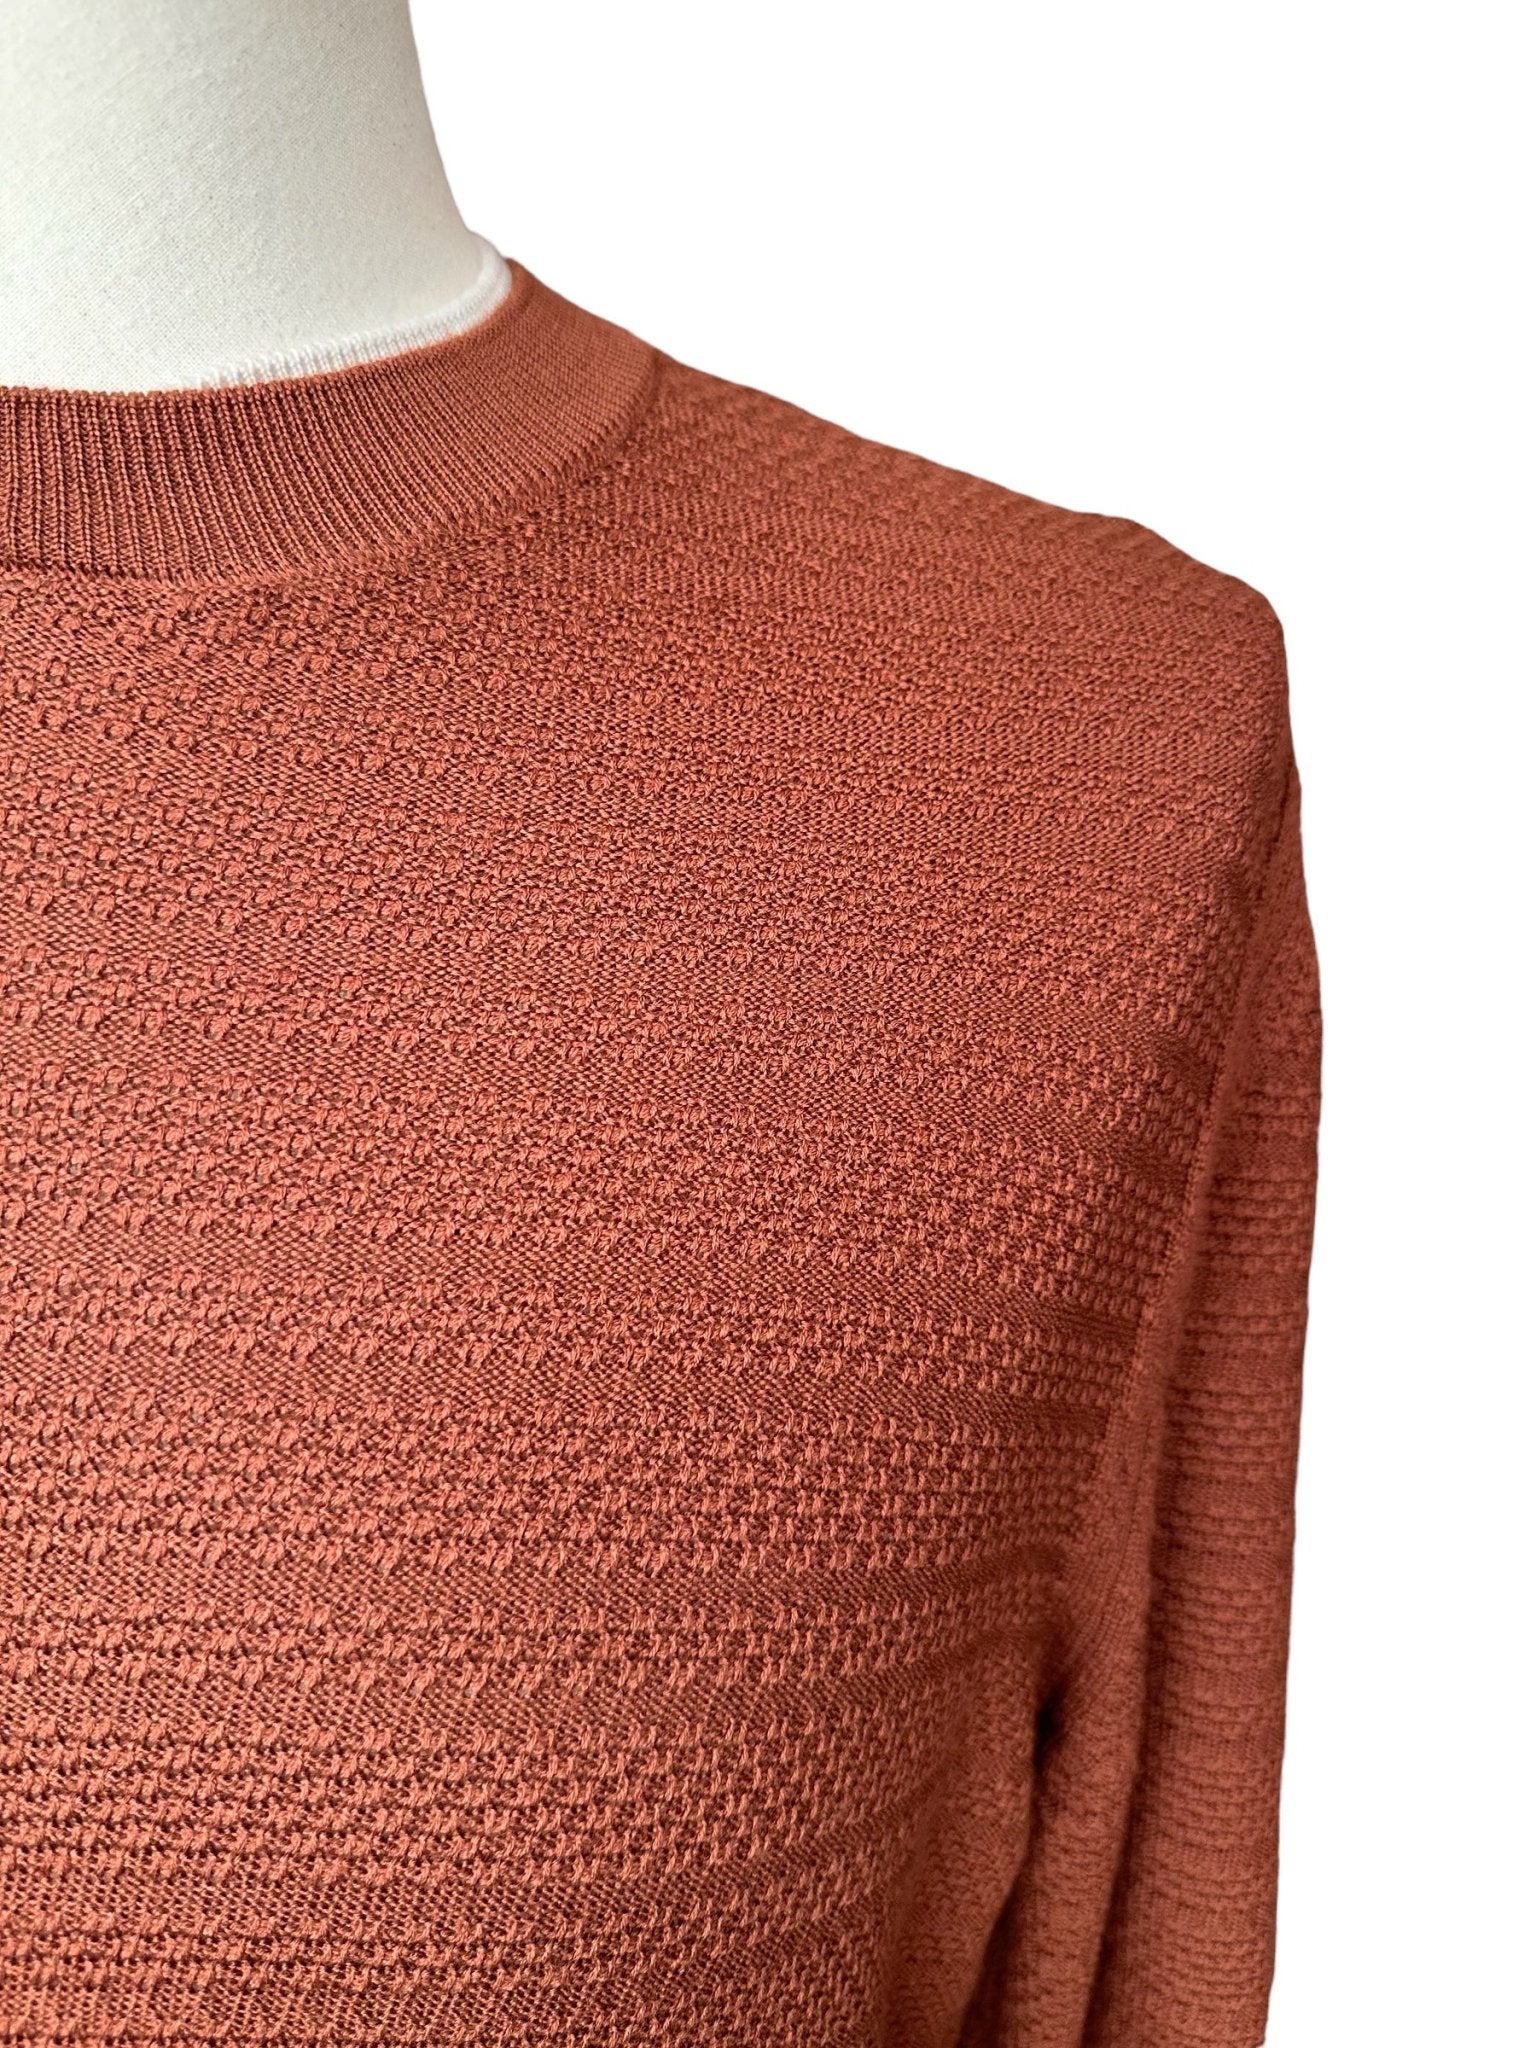 Zegna High Performance Knit Pullover - 24/7 Clothing